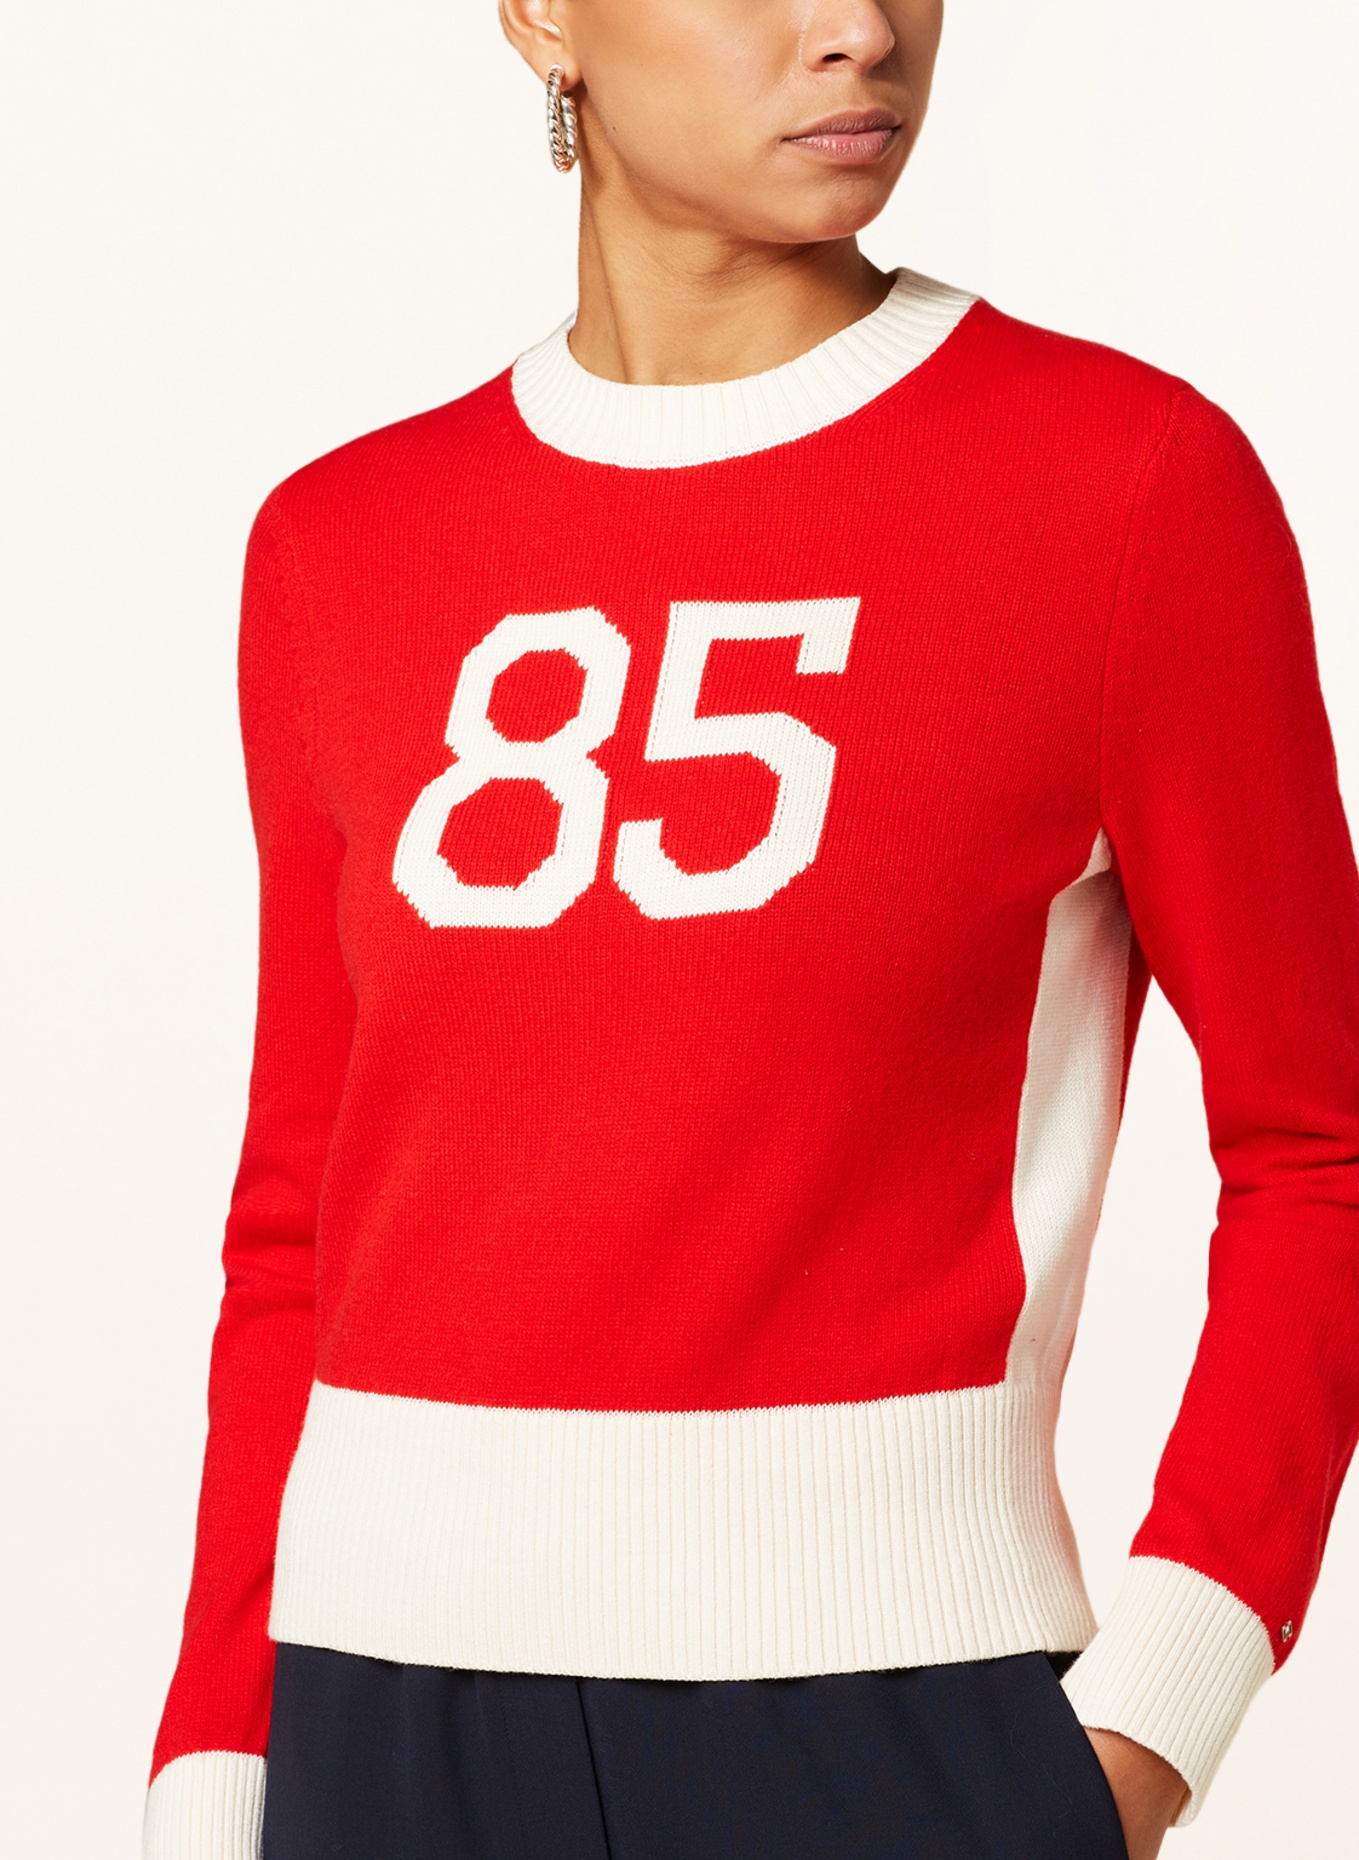 TOMMY HILFIGER Pullover, Farbe: ROT/ CREME (Bild 4)